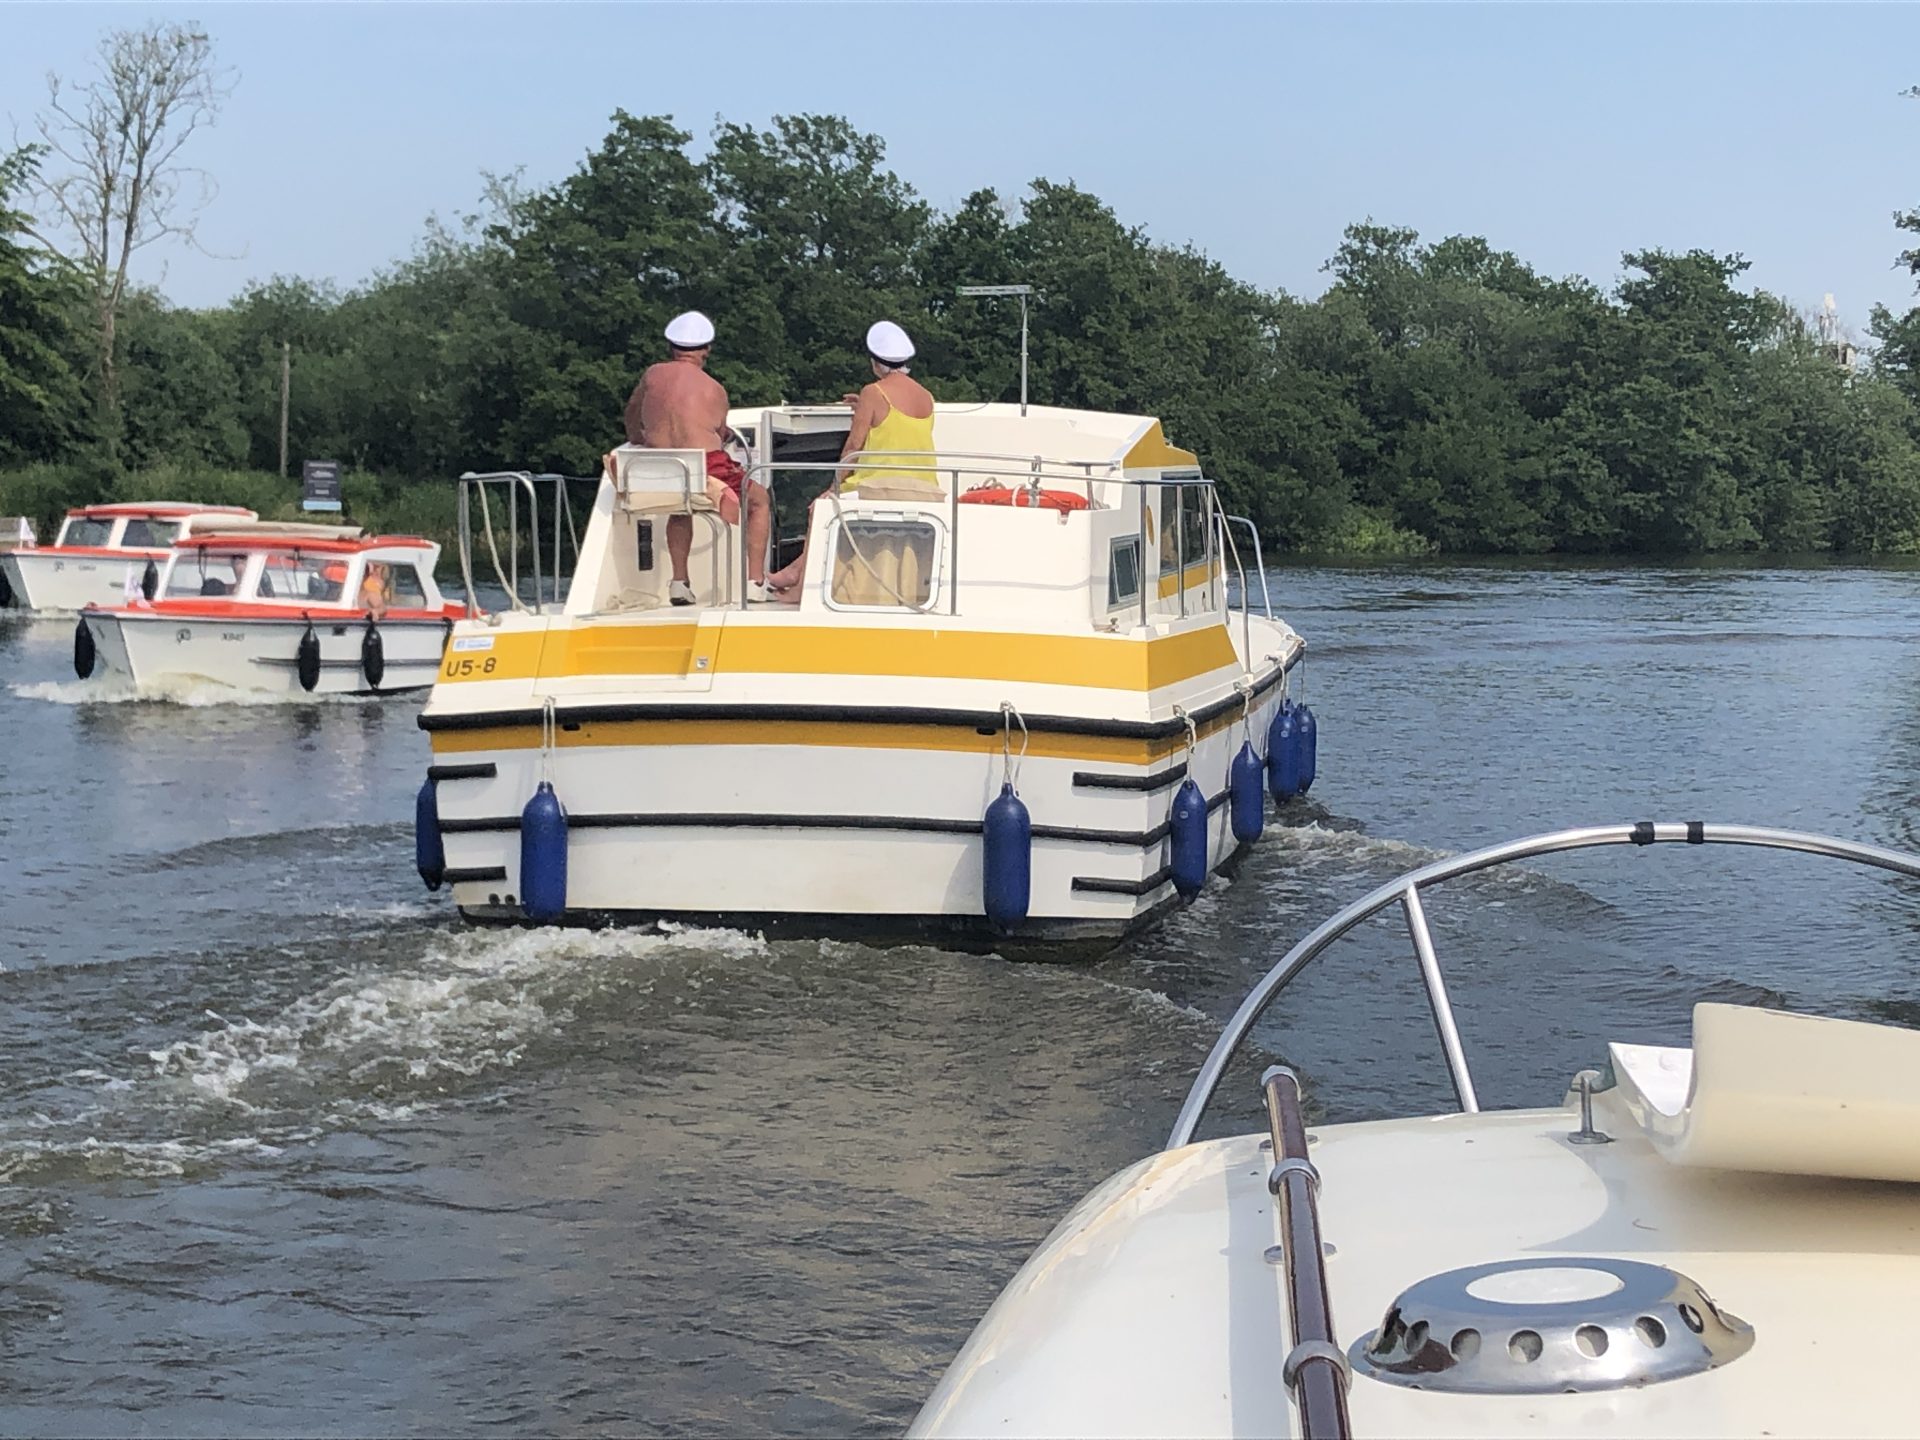 Beware of anyone at the helm of a boat wearing a captain's hat. It's generally worth avoiding them. In this case, they were speeding through the most congested part of Horning.